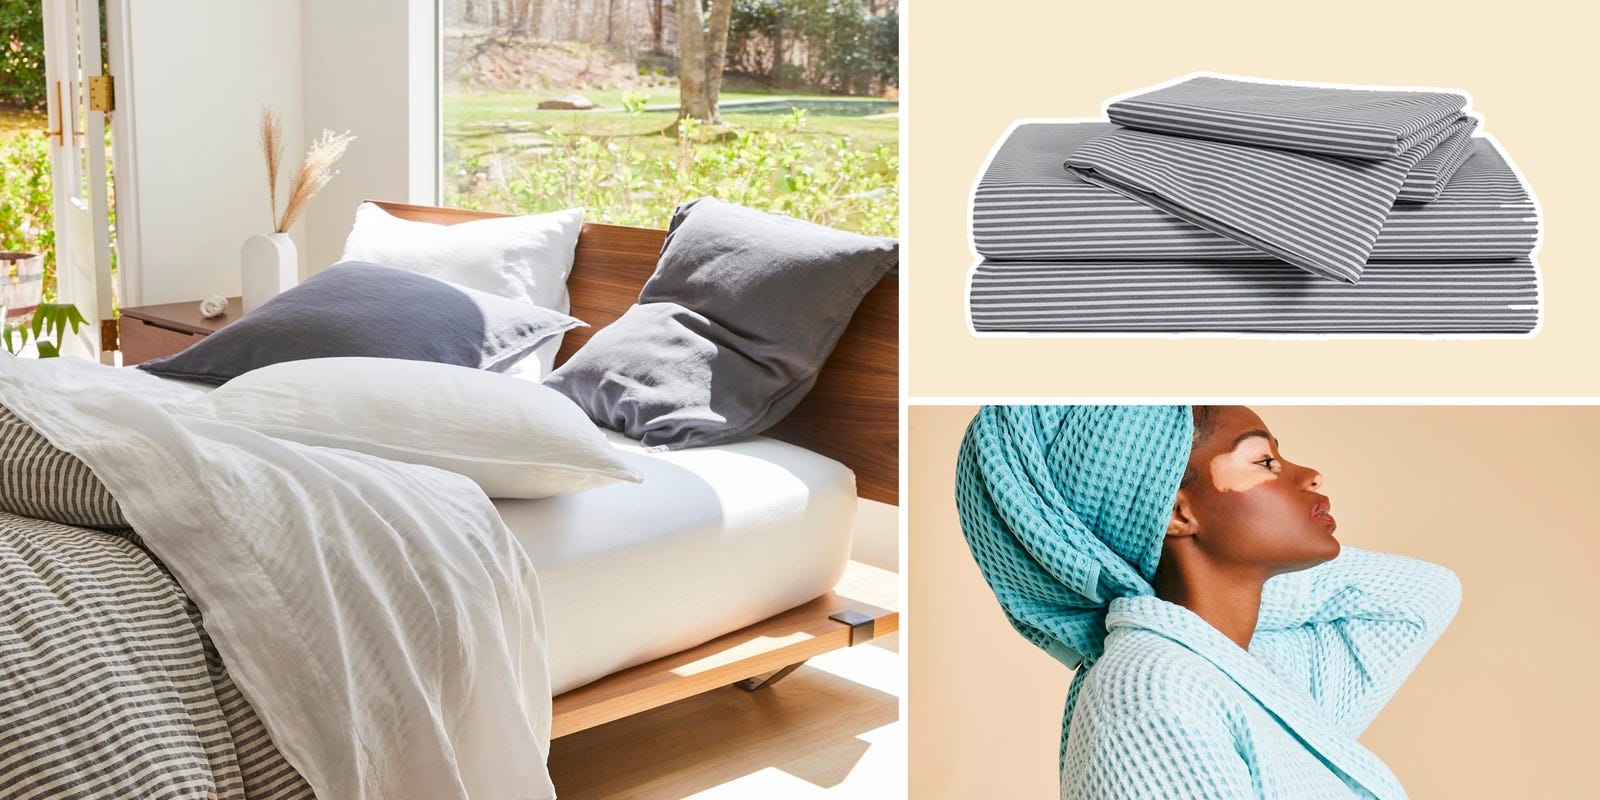 Brooklinen sale: Save 15% on sheets, clothing and more this weekend